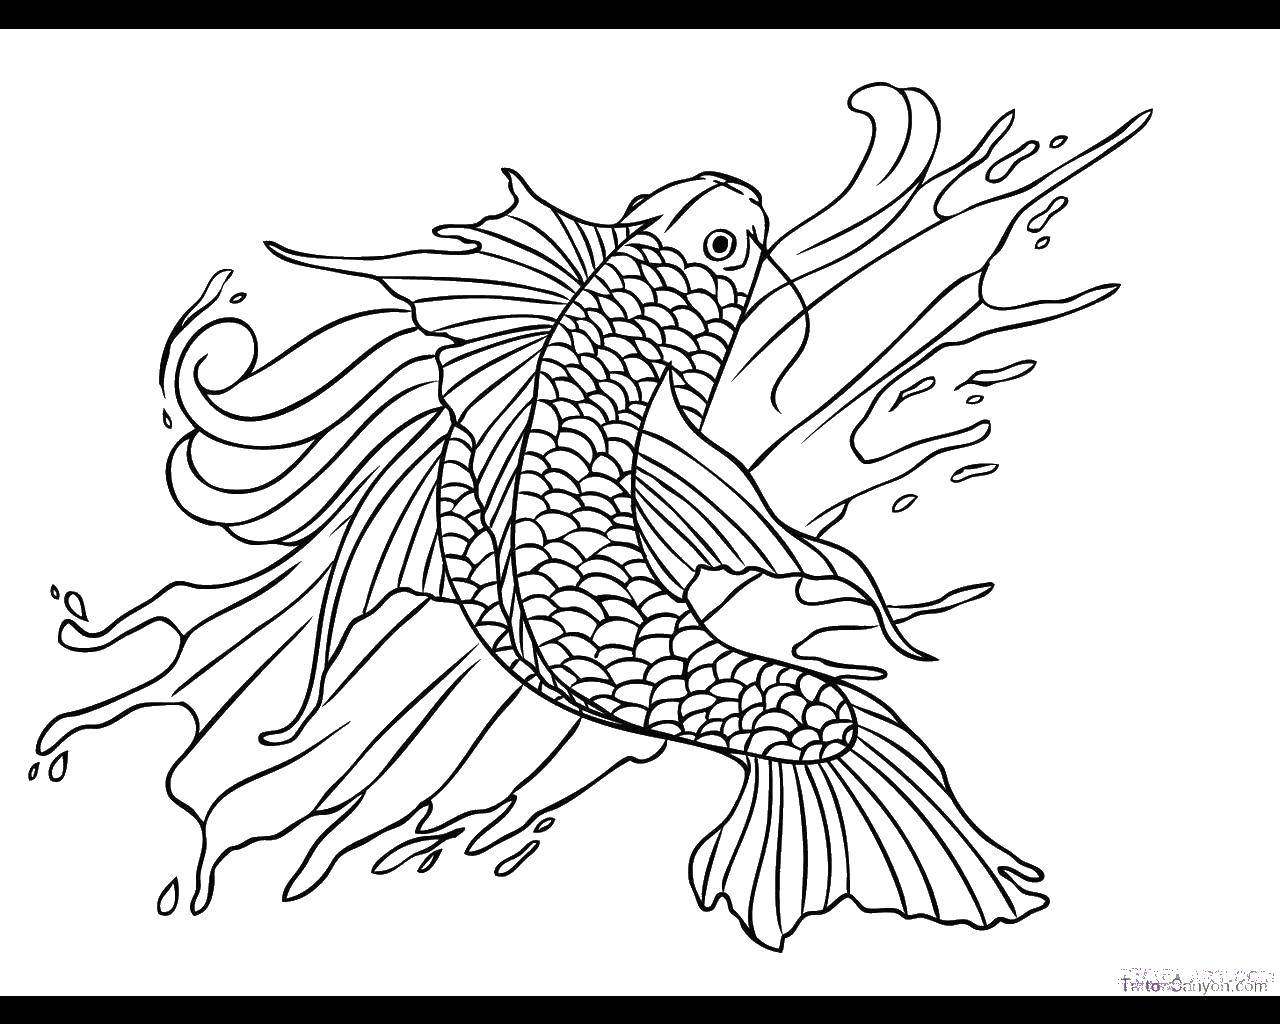 Coloring Fish and water. Category fish. Tags:  fish, water.